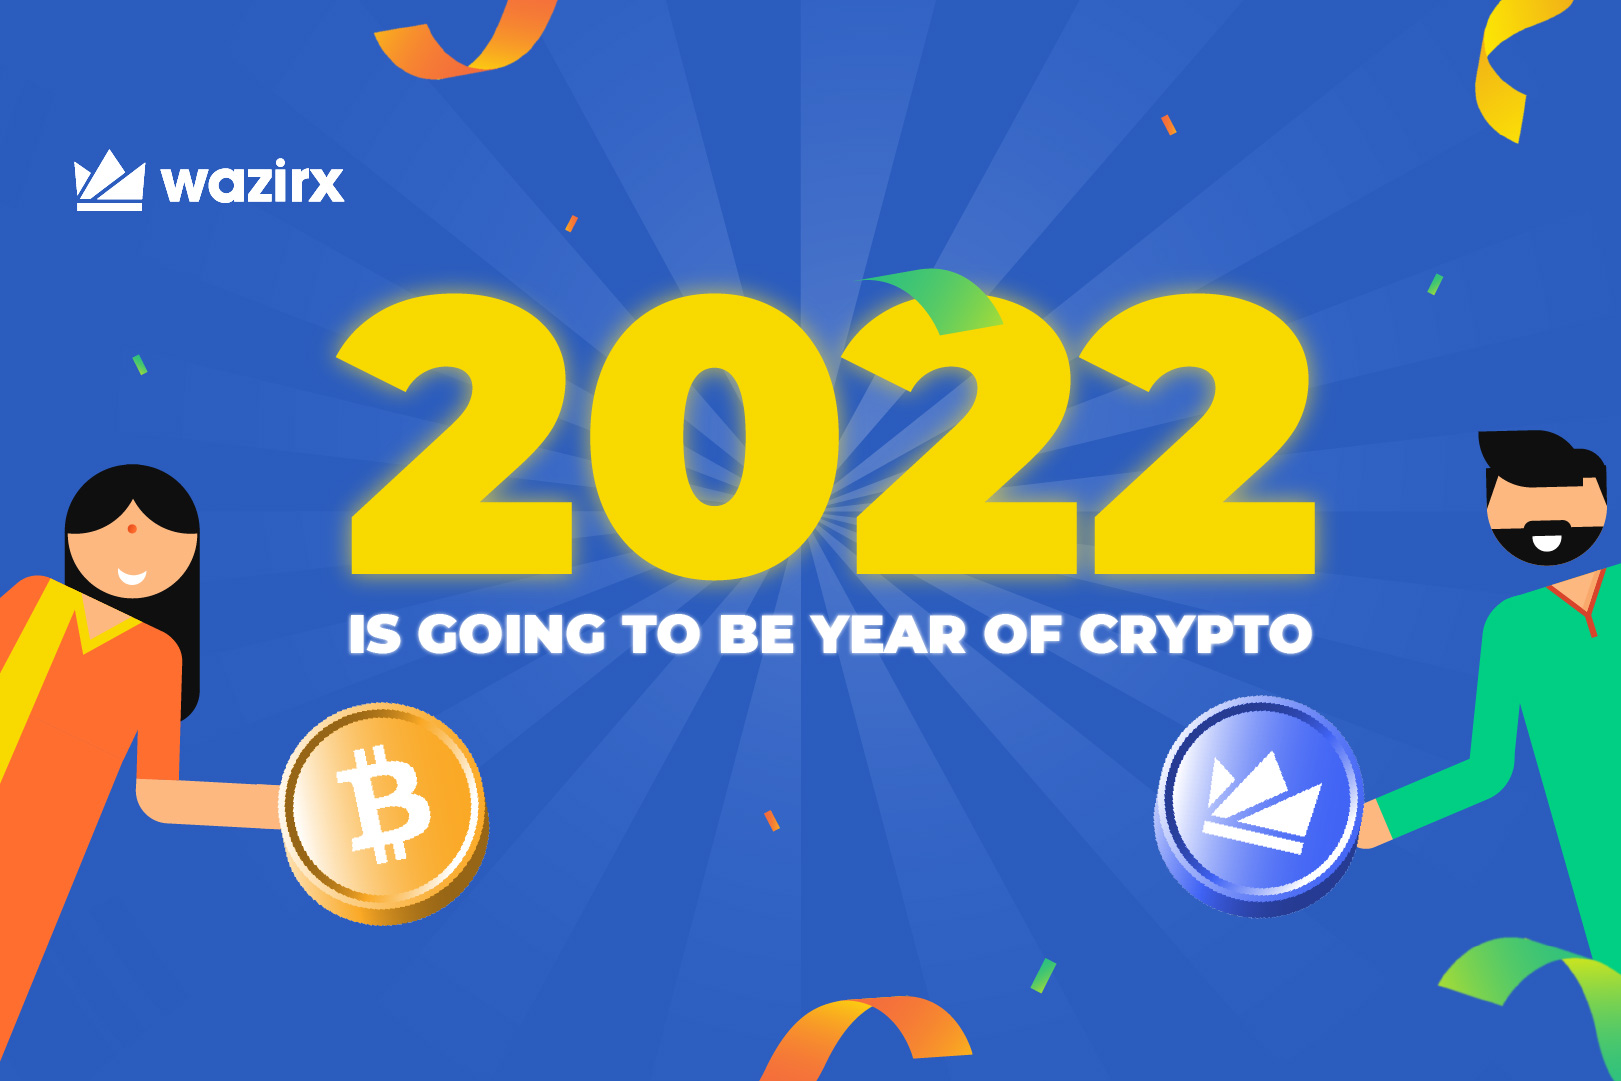 2022 is going to be the year of crypto